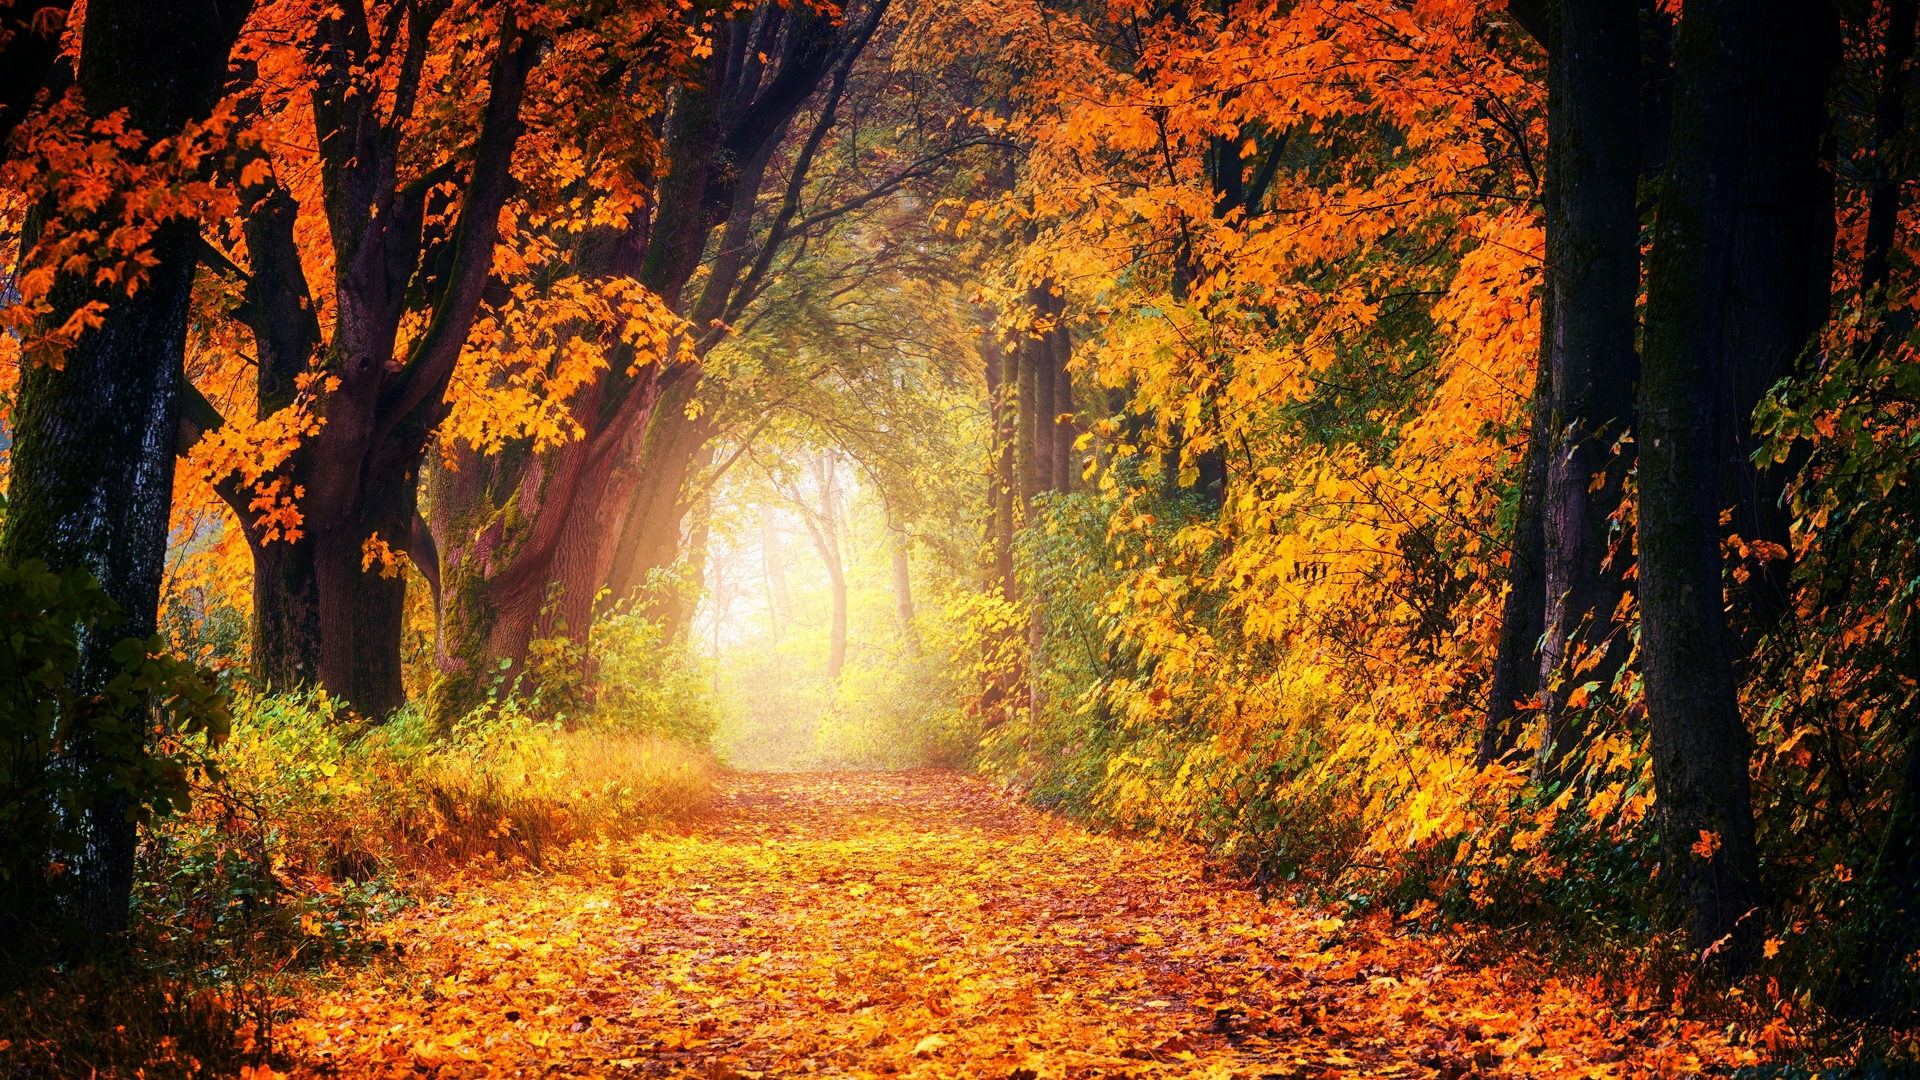 Autumn Park Trees And Path Covered With Leaves - Autumn Park - HD Wallpaper 